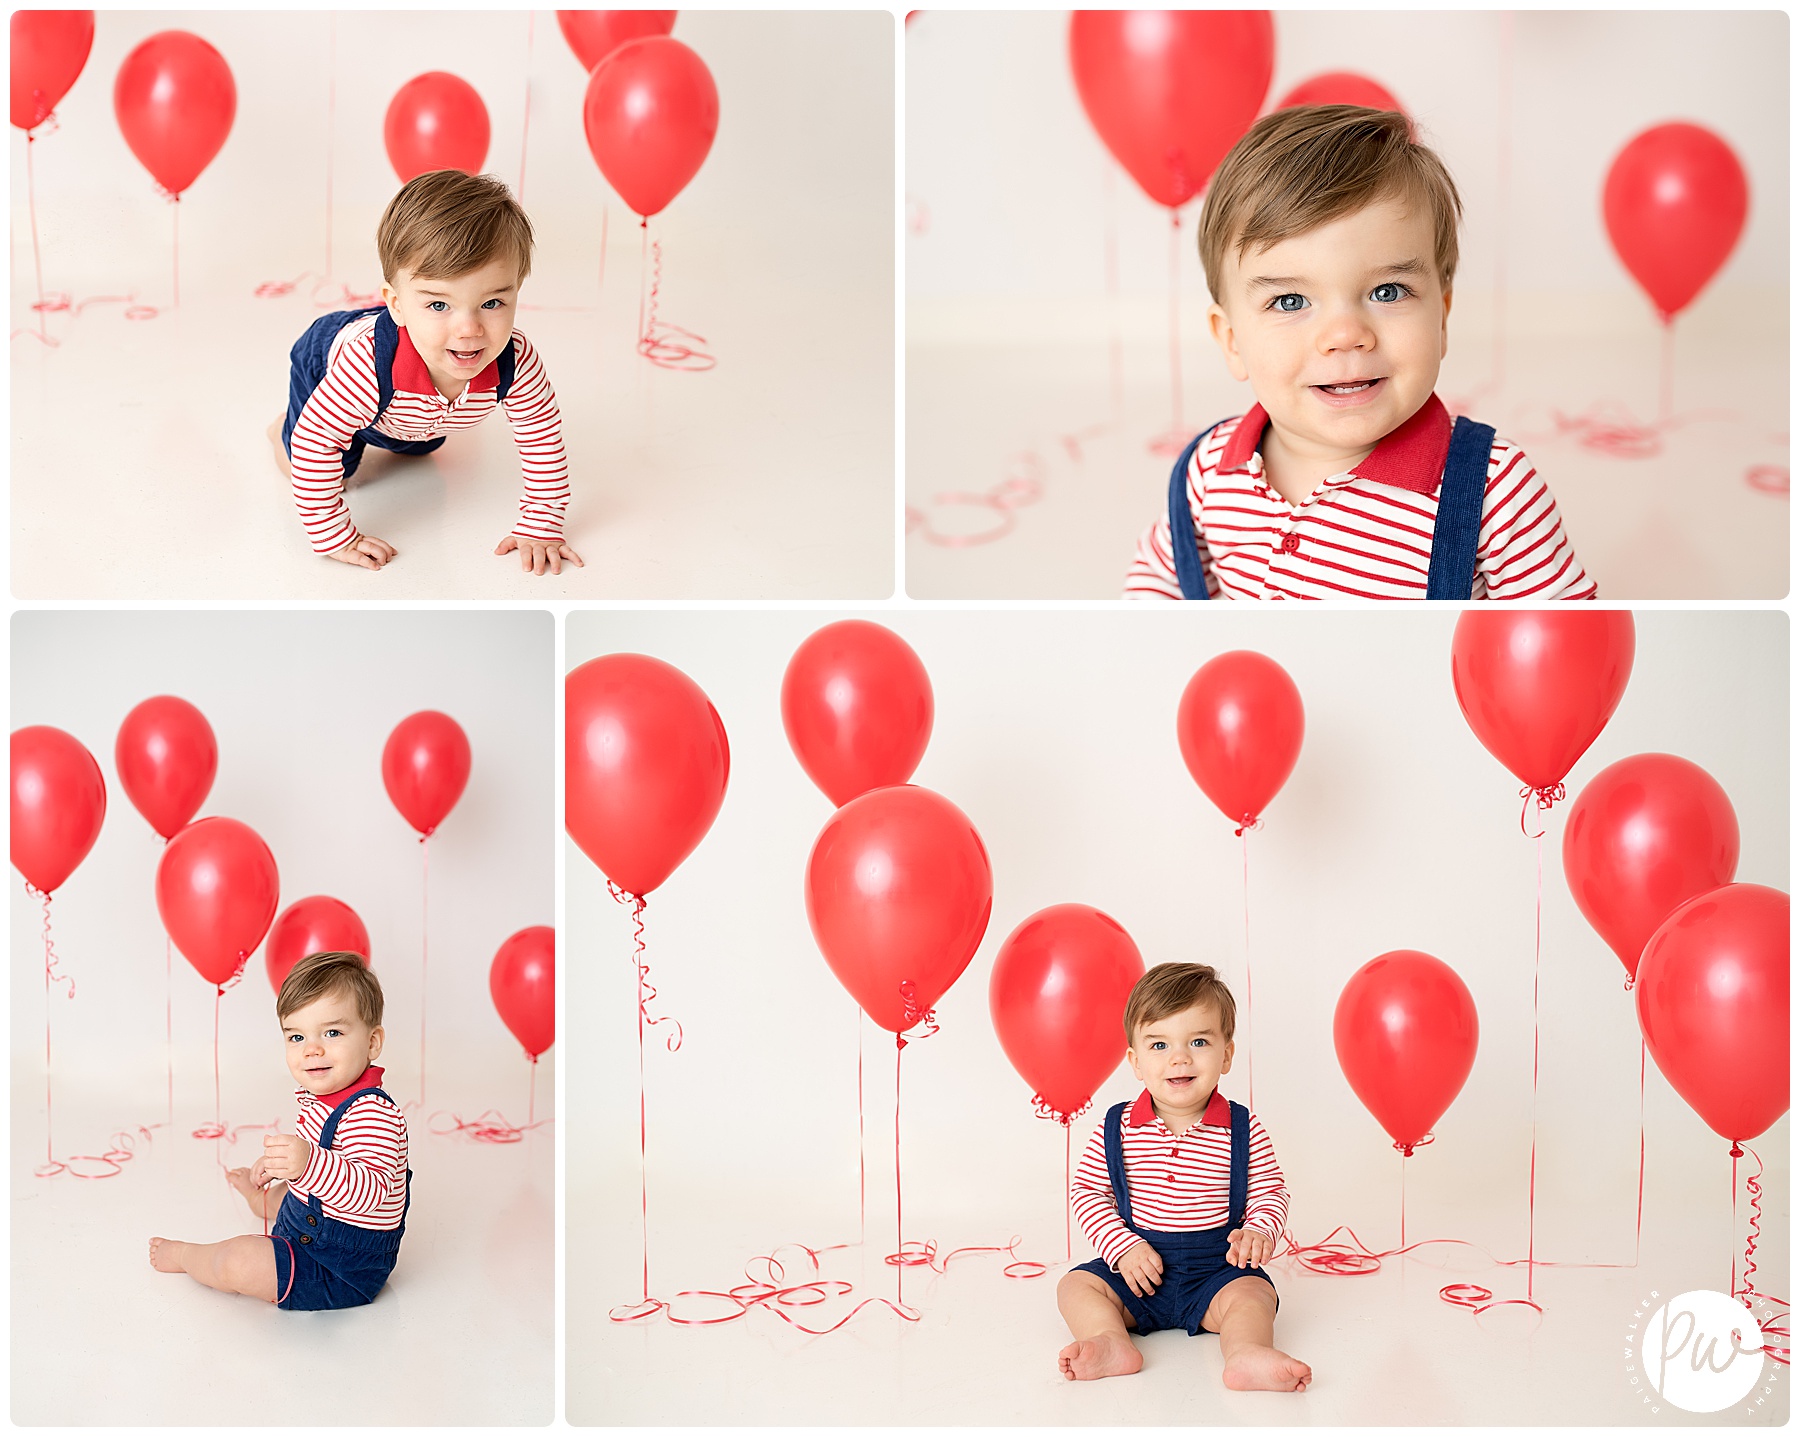 one year old boy surrounded by balloons